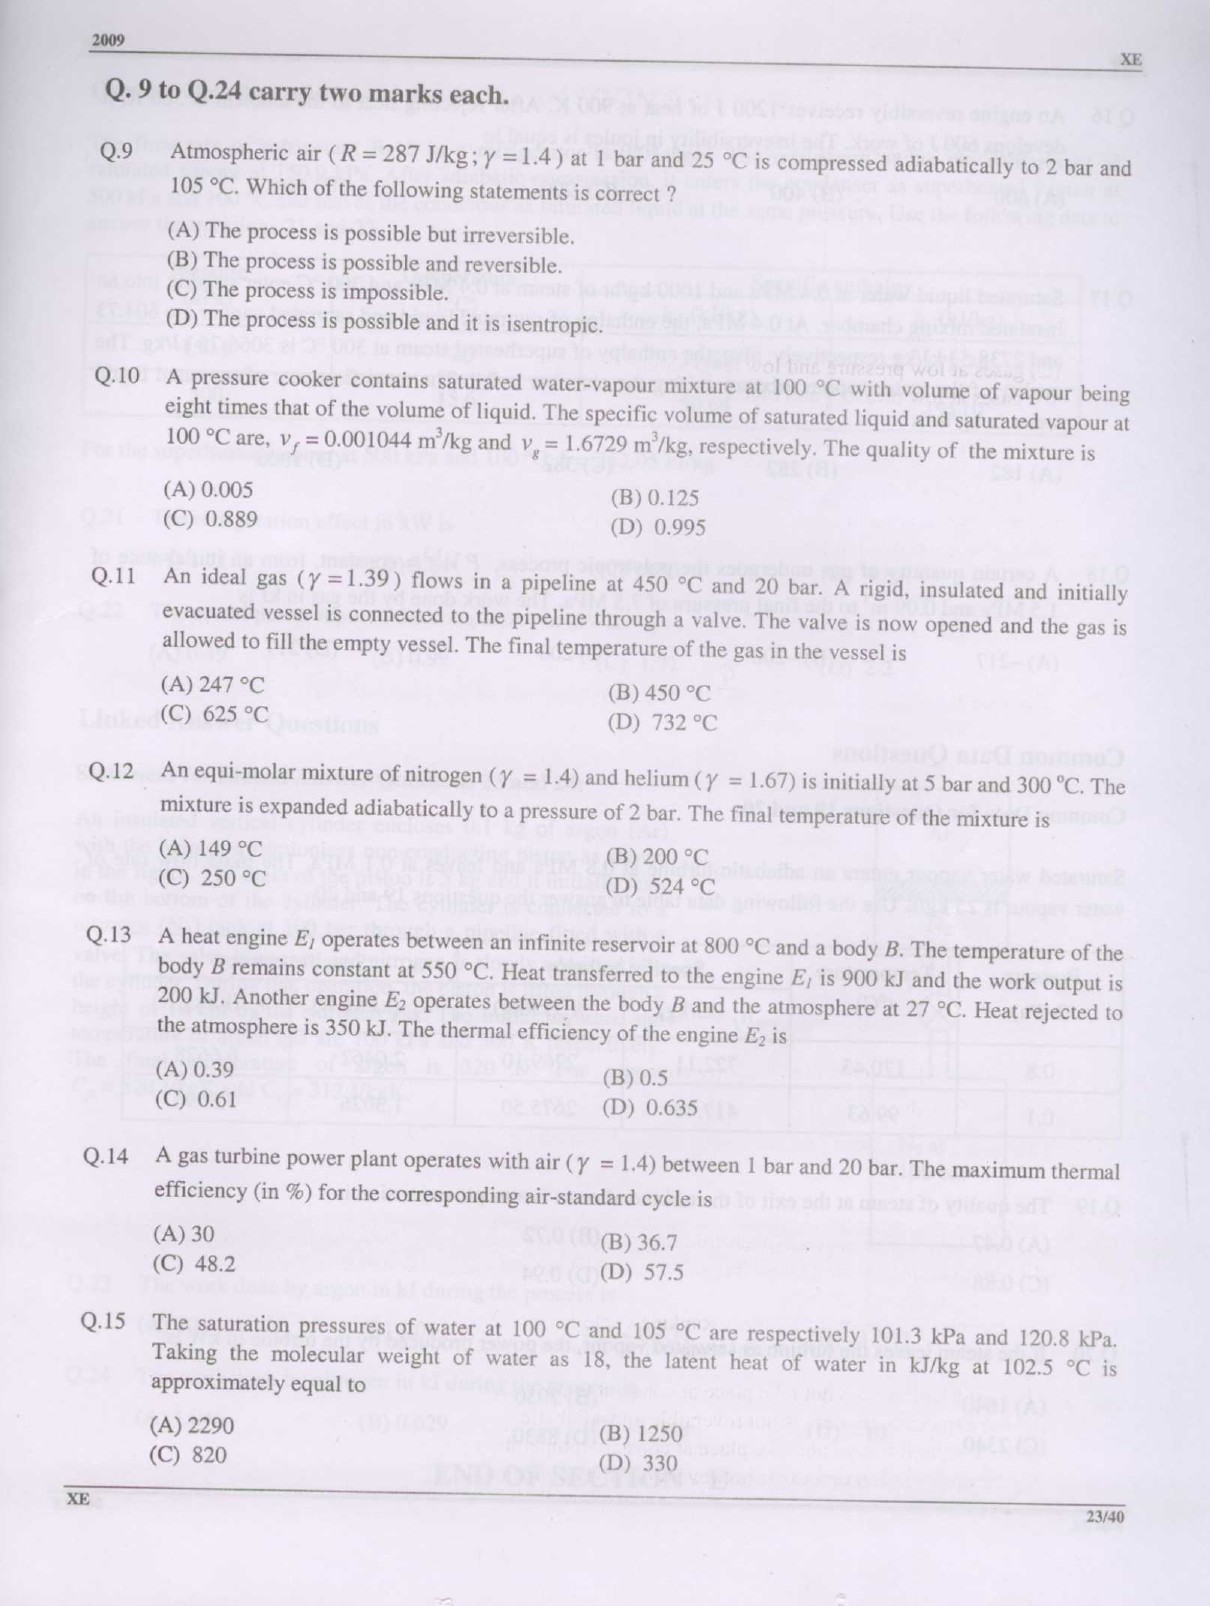 GATE Exam Question Paper 2009 Engineering Sciences 23